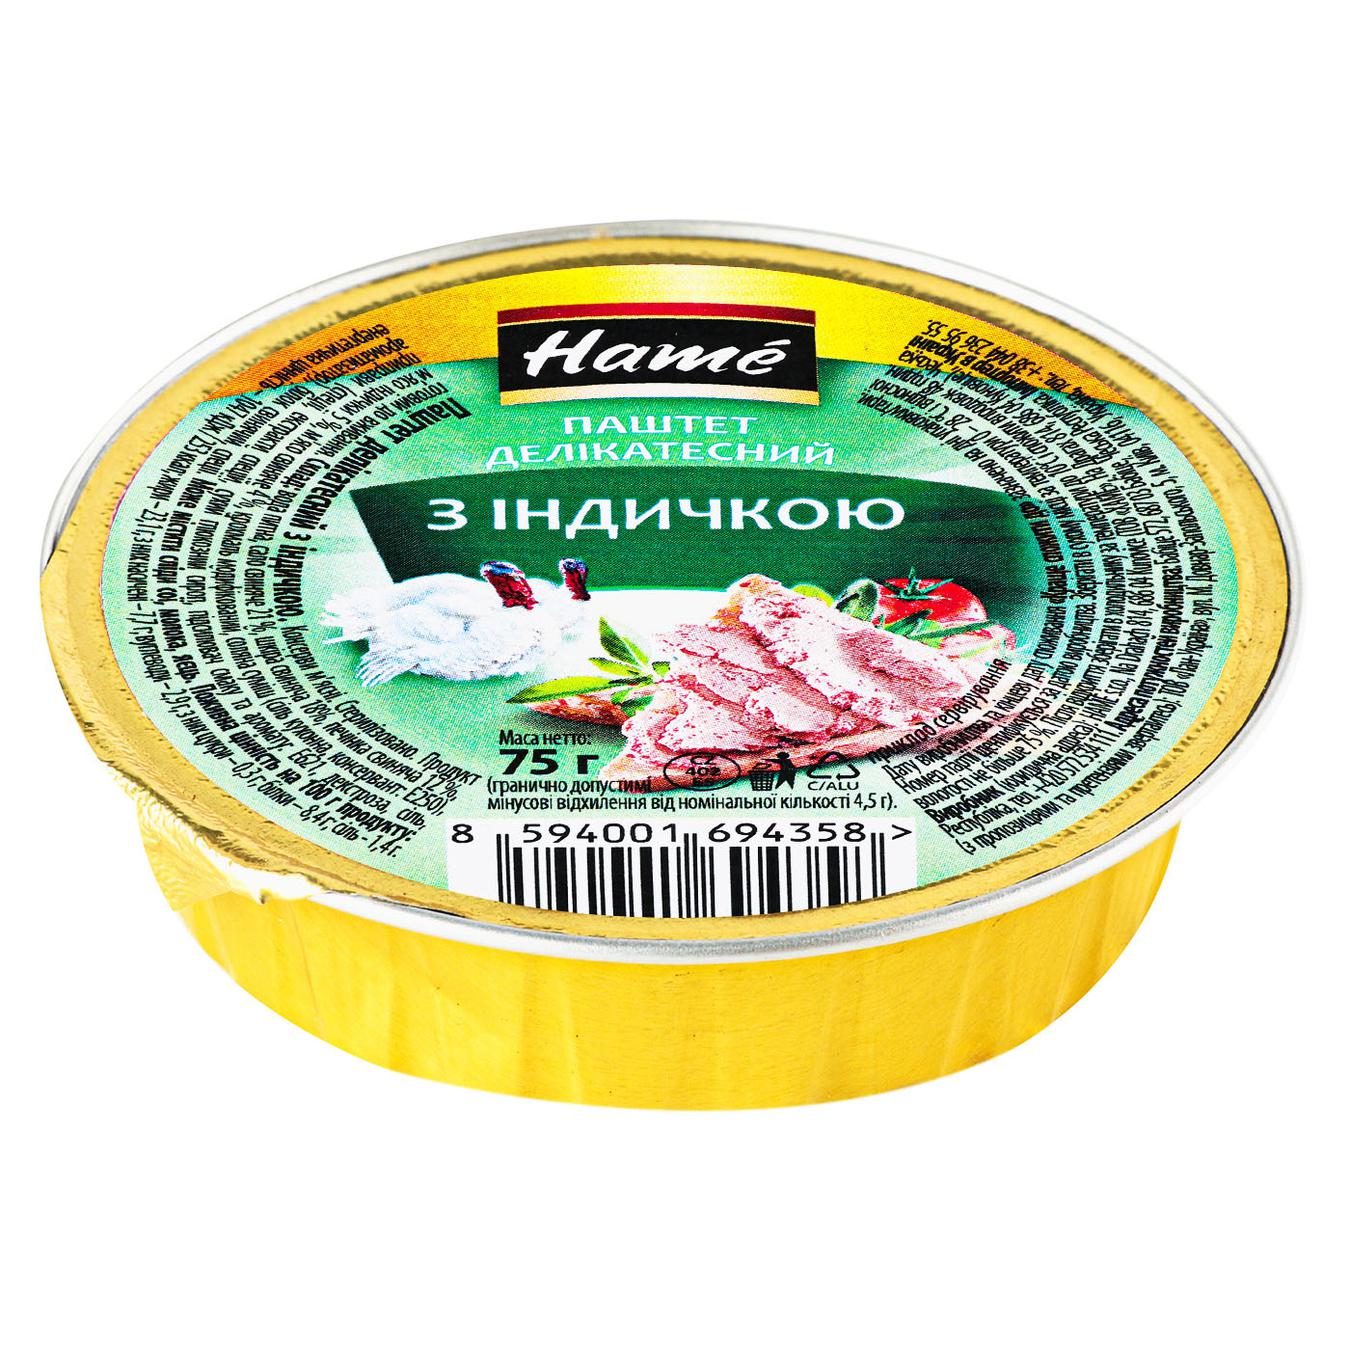 Hame pate with turkey, delicate 75g